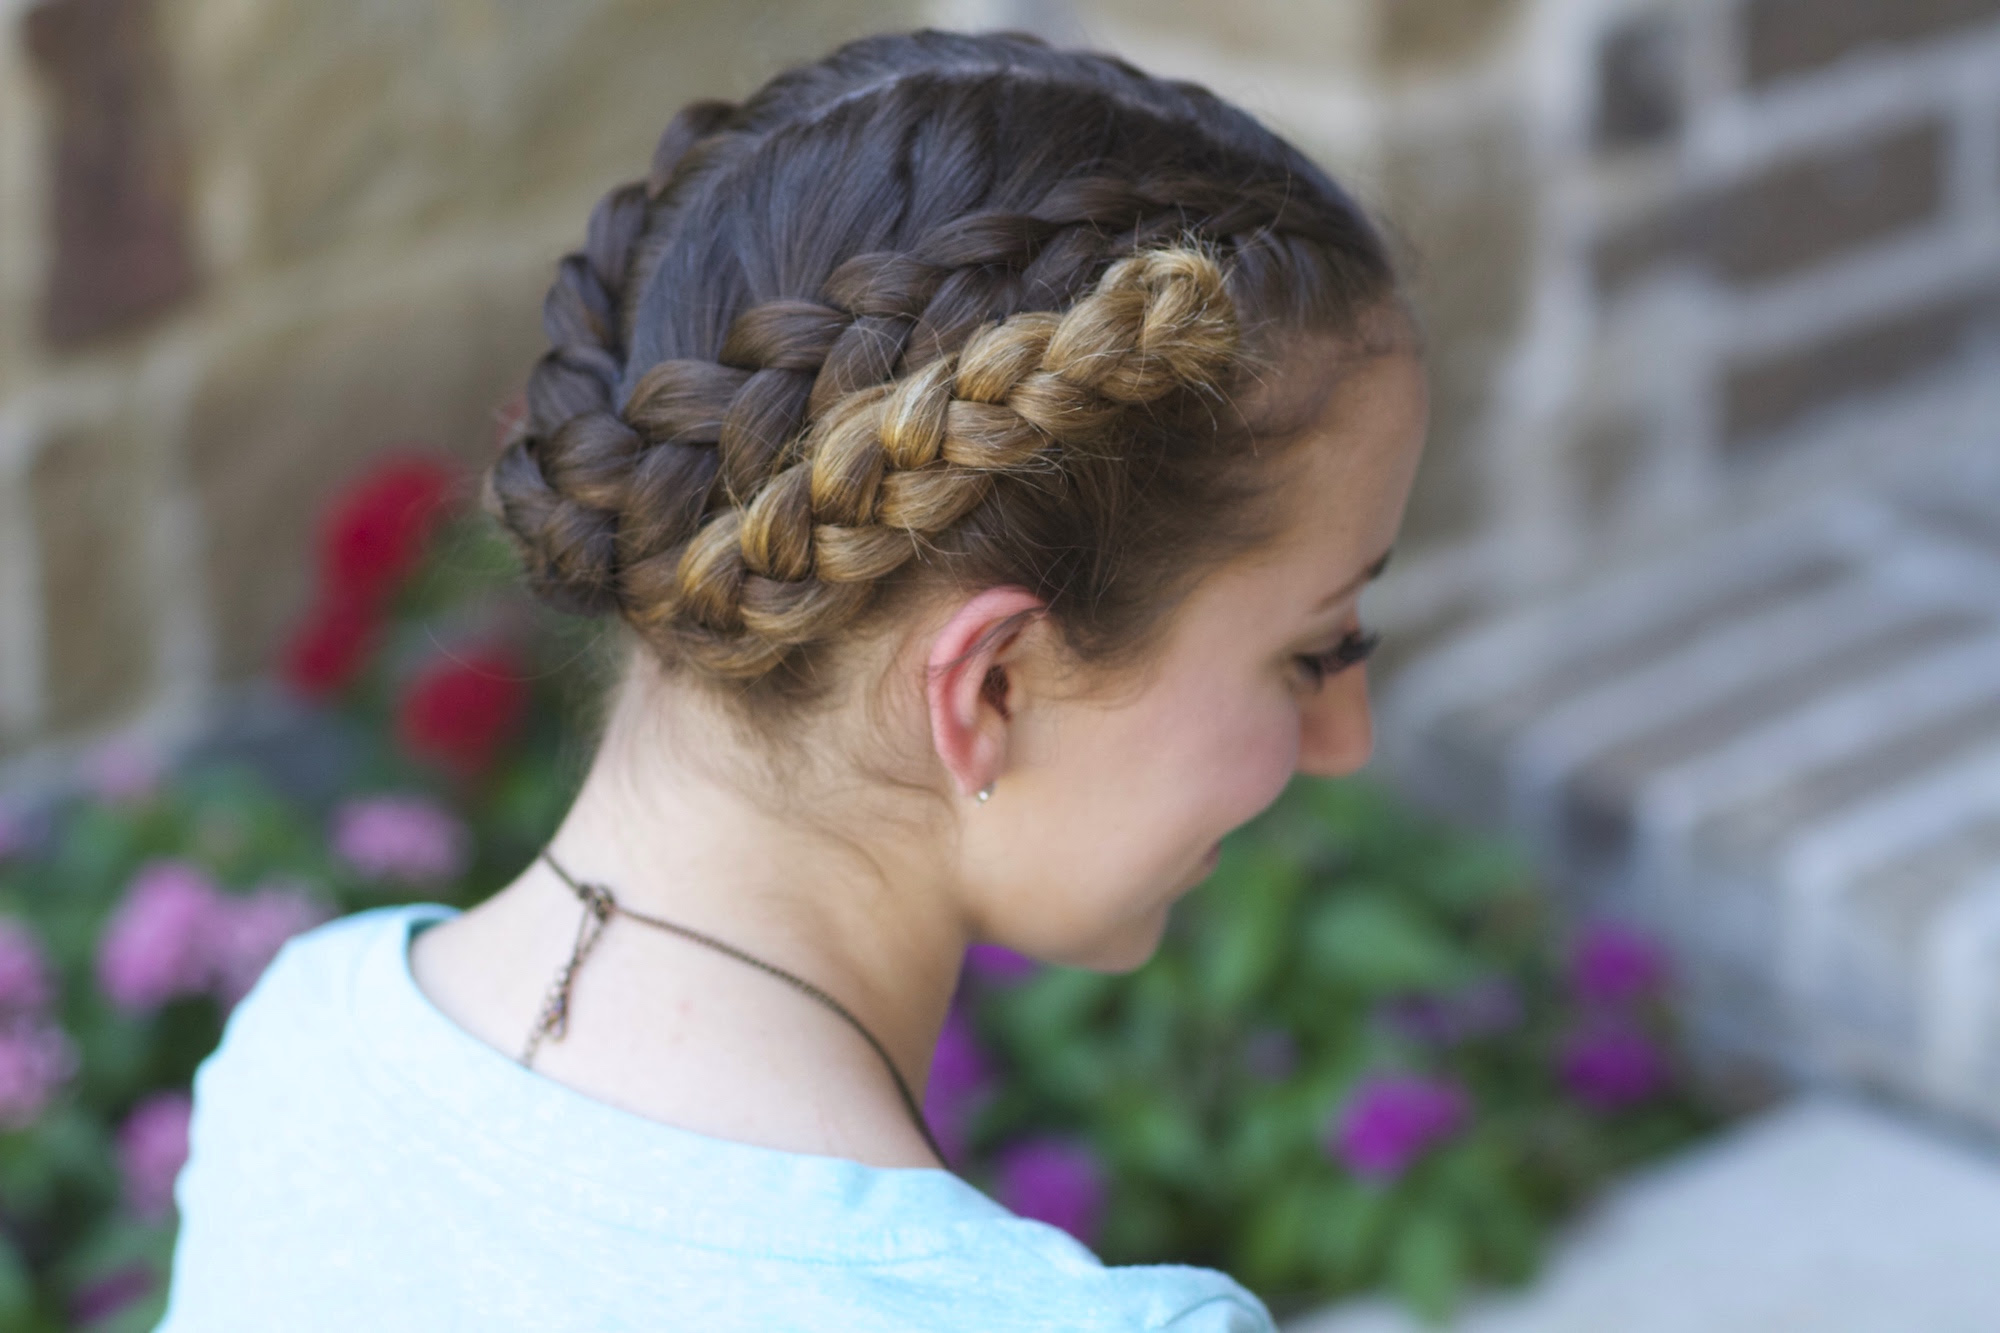 How To S Wiki 88 How To Style Braids For School